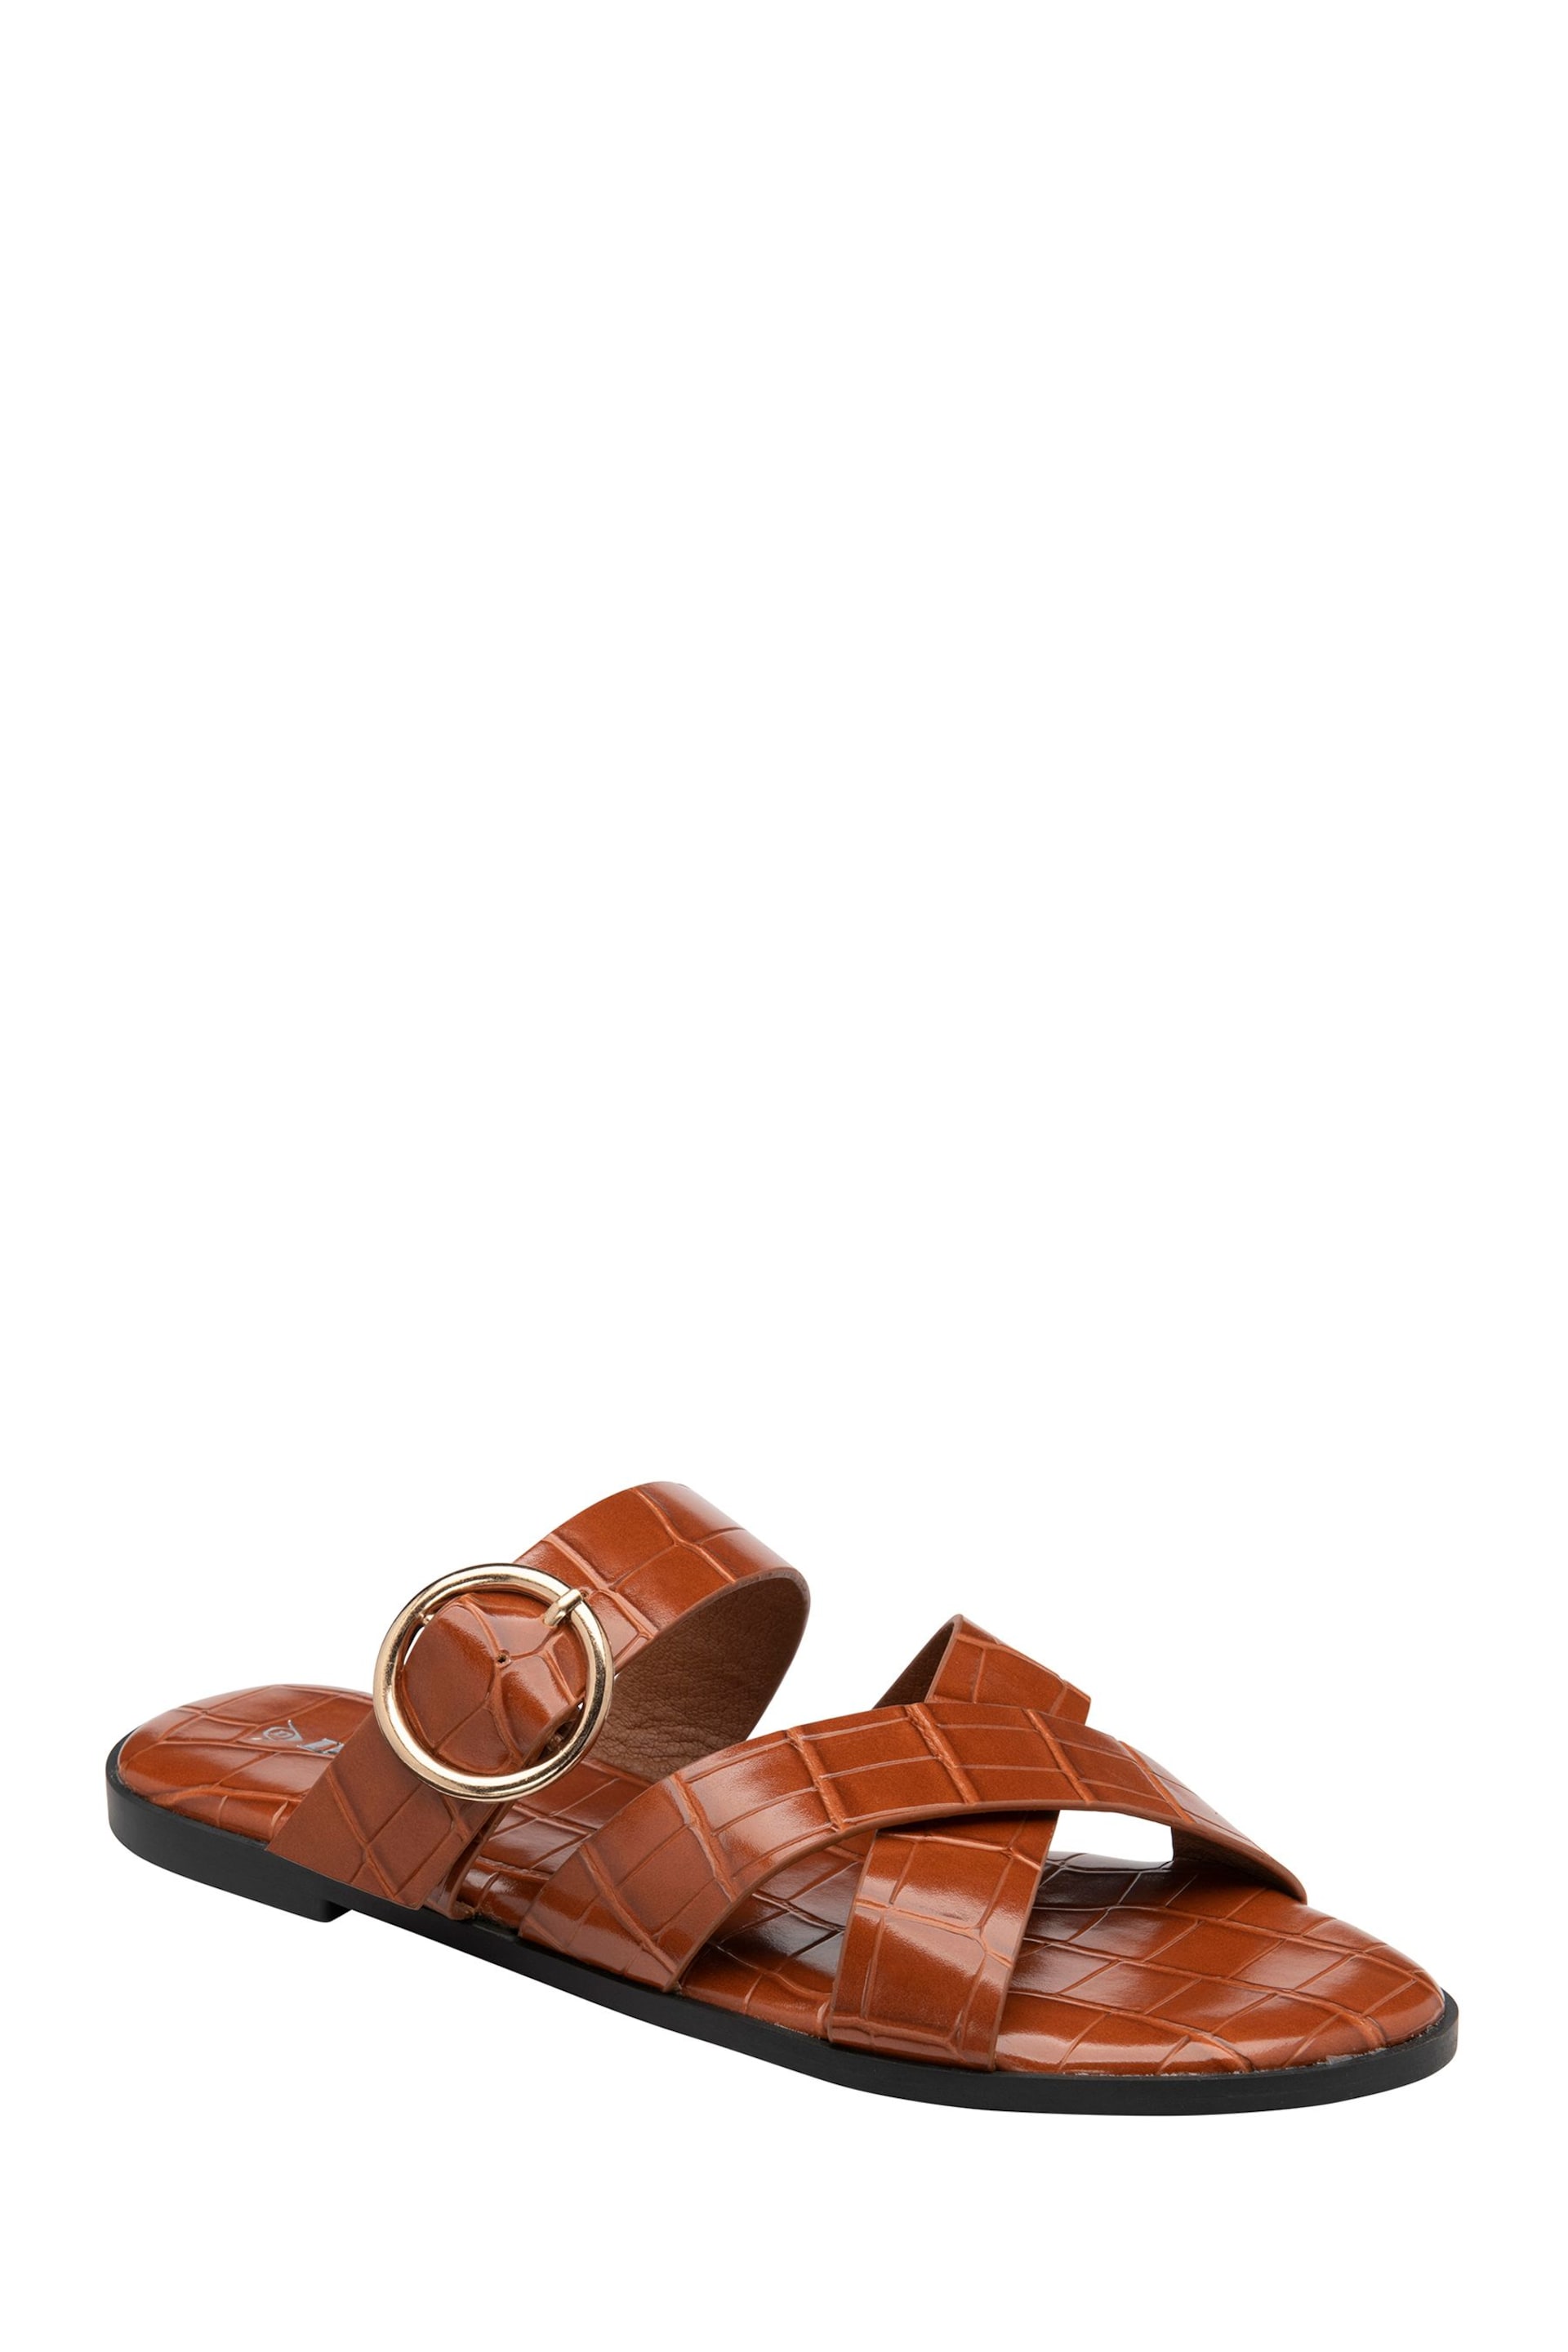 Dunlop Brown Open-Toe Sandals - Image 1 of 4